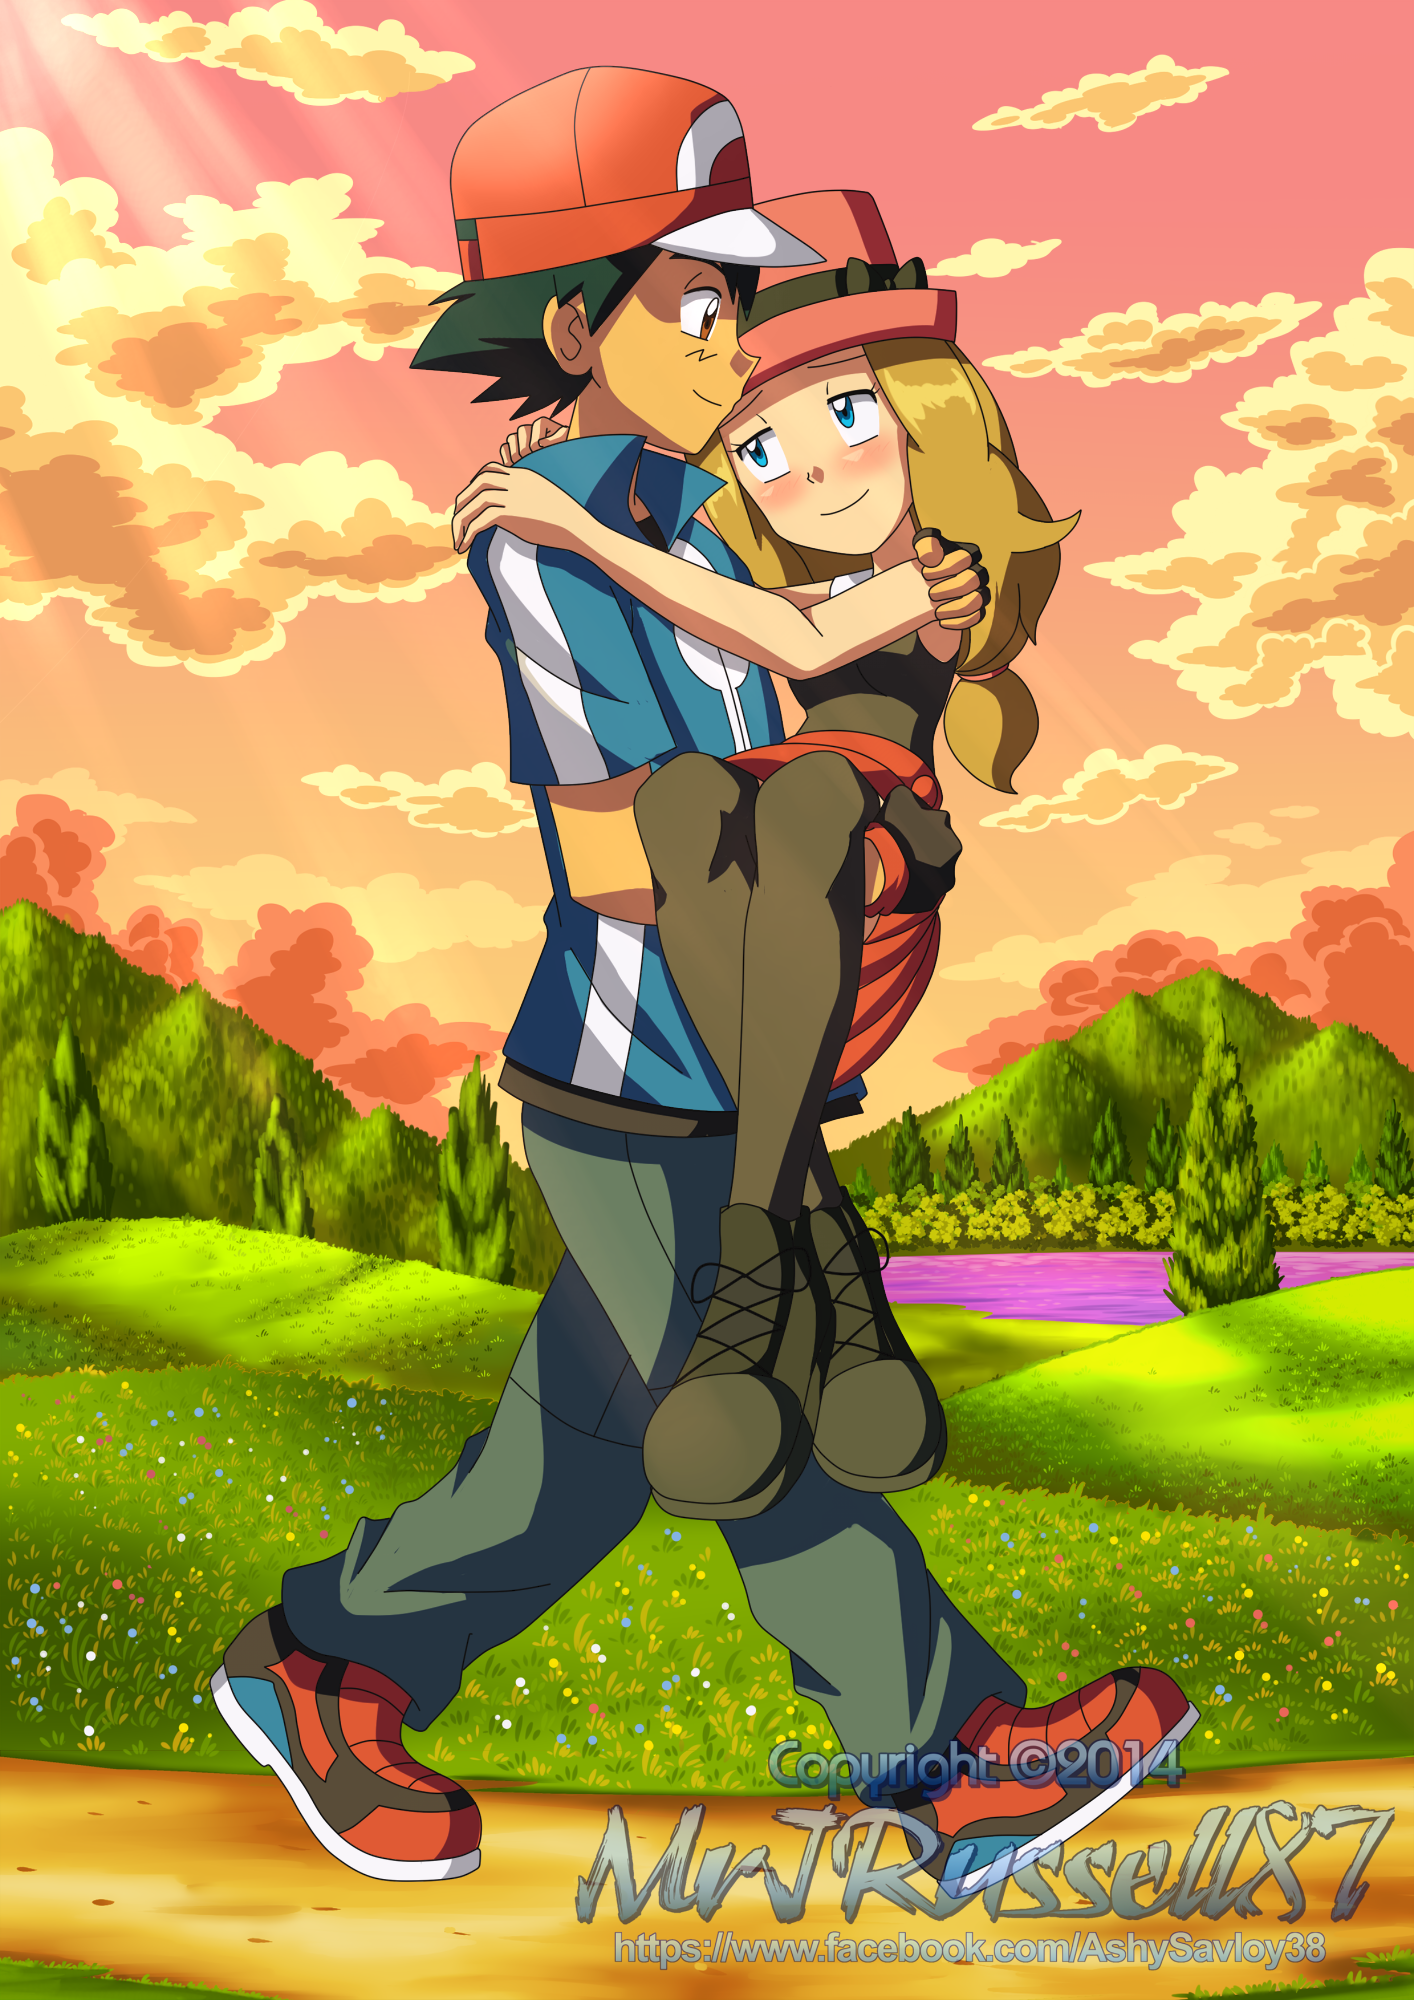 Best of Ash and serena together